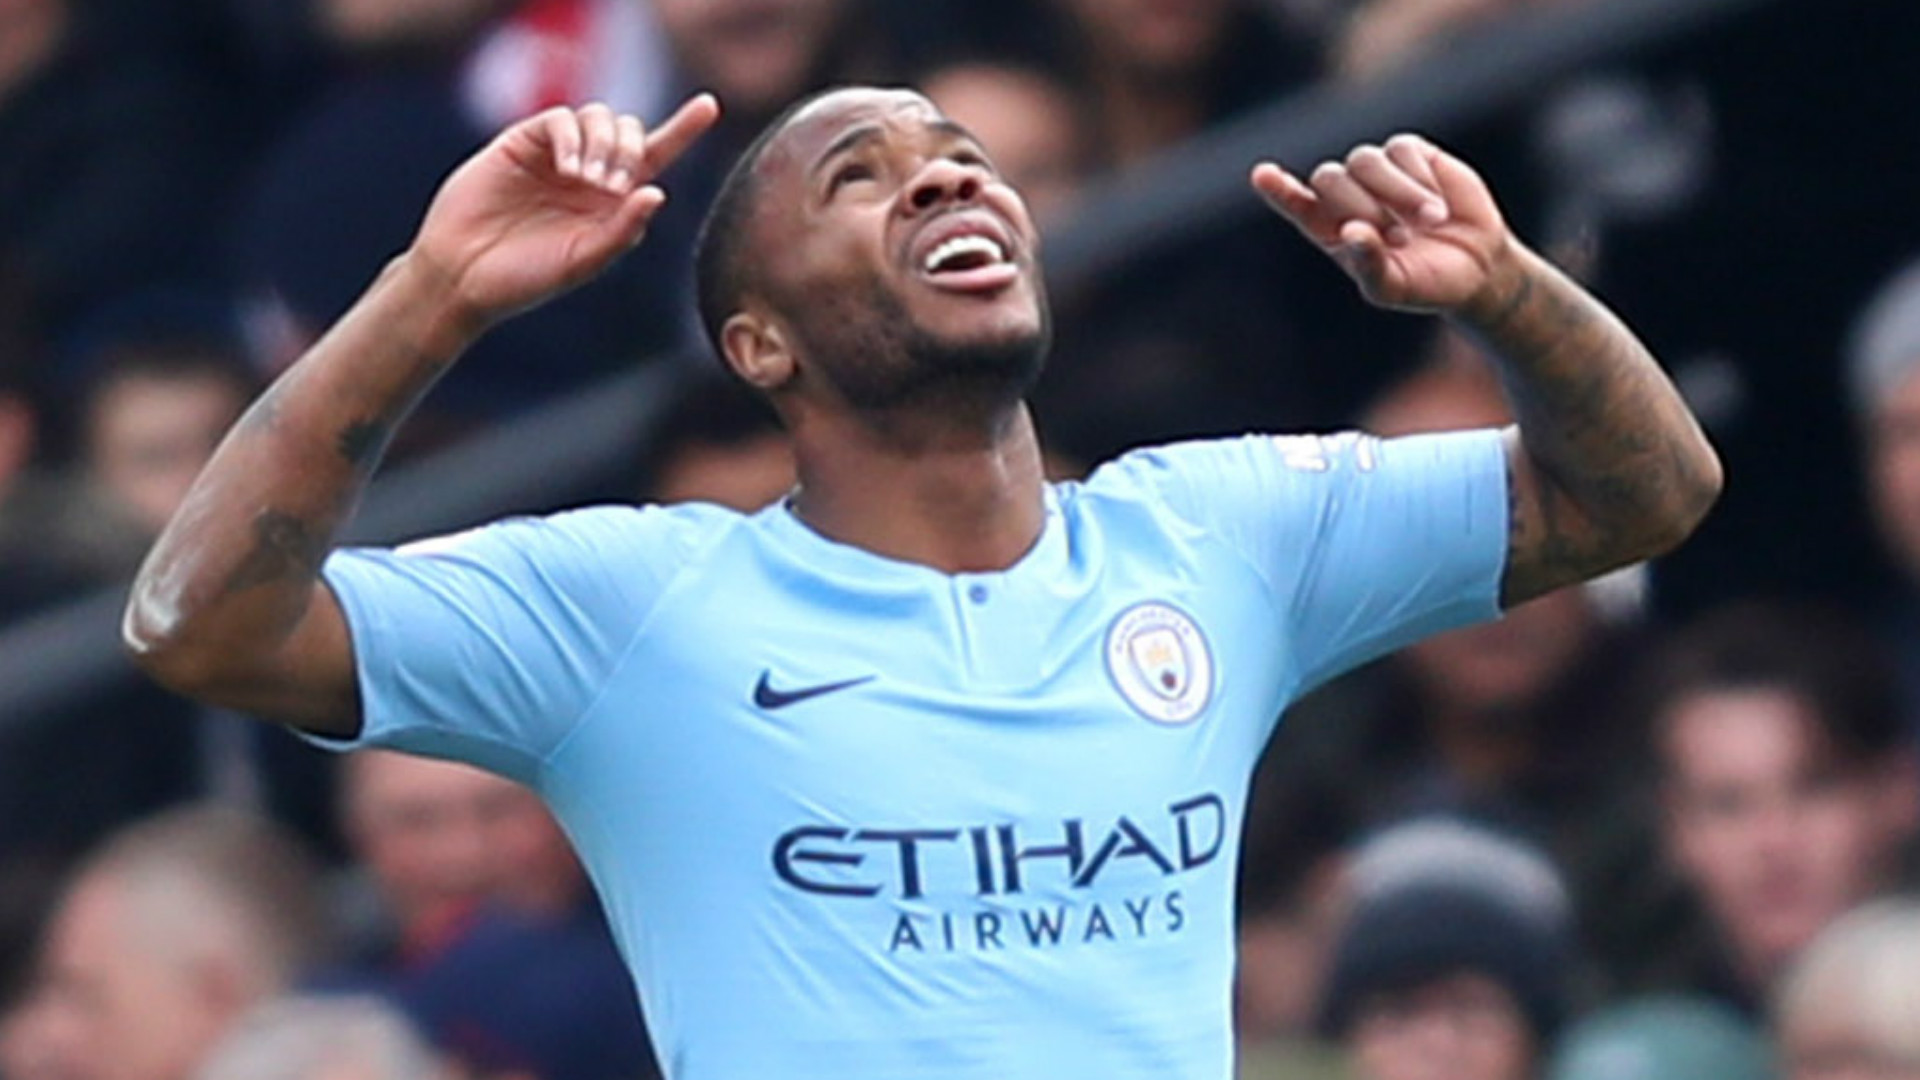  Raheem Sterling of Manchester City celebrates scoring a goal during the 2018-19 season.